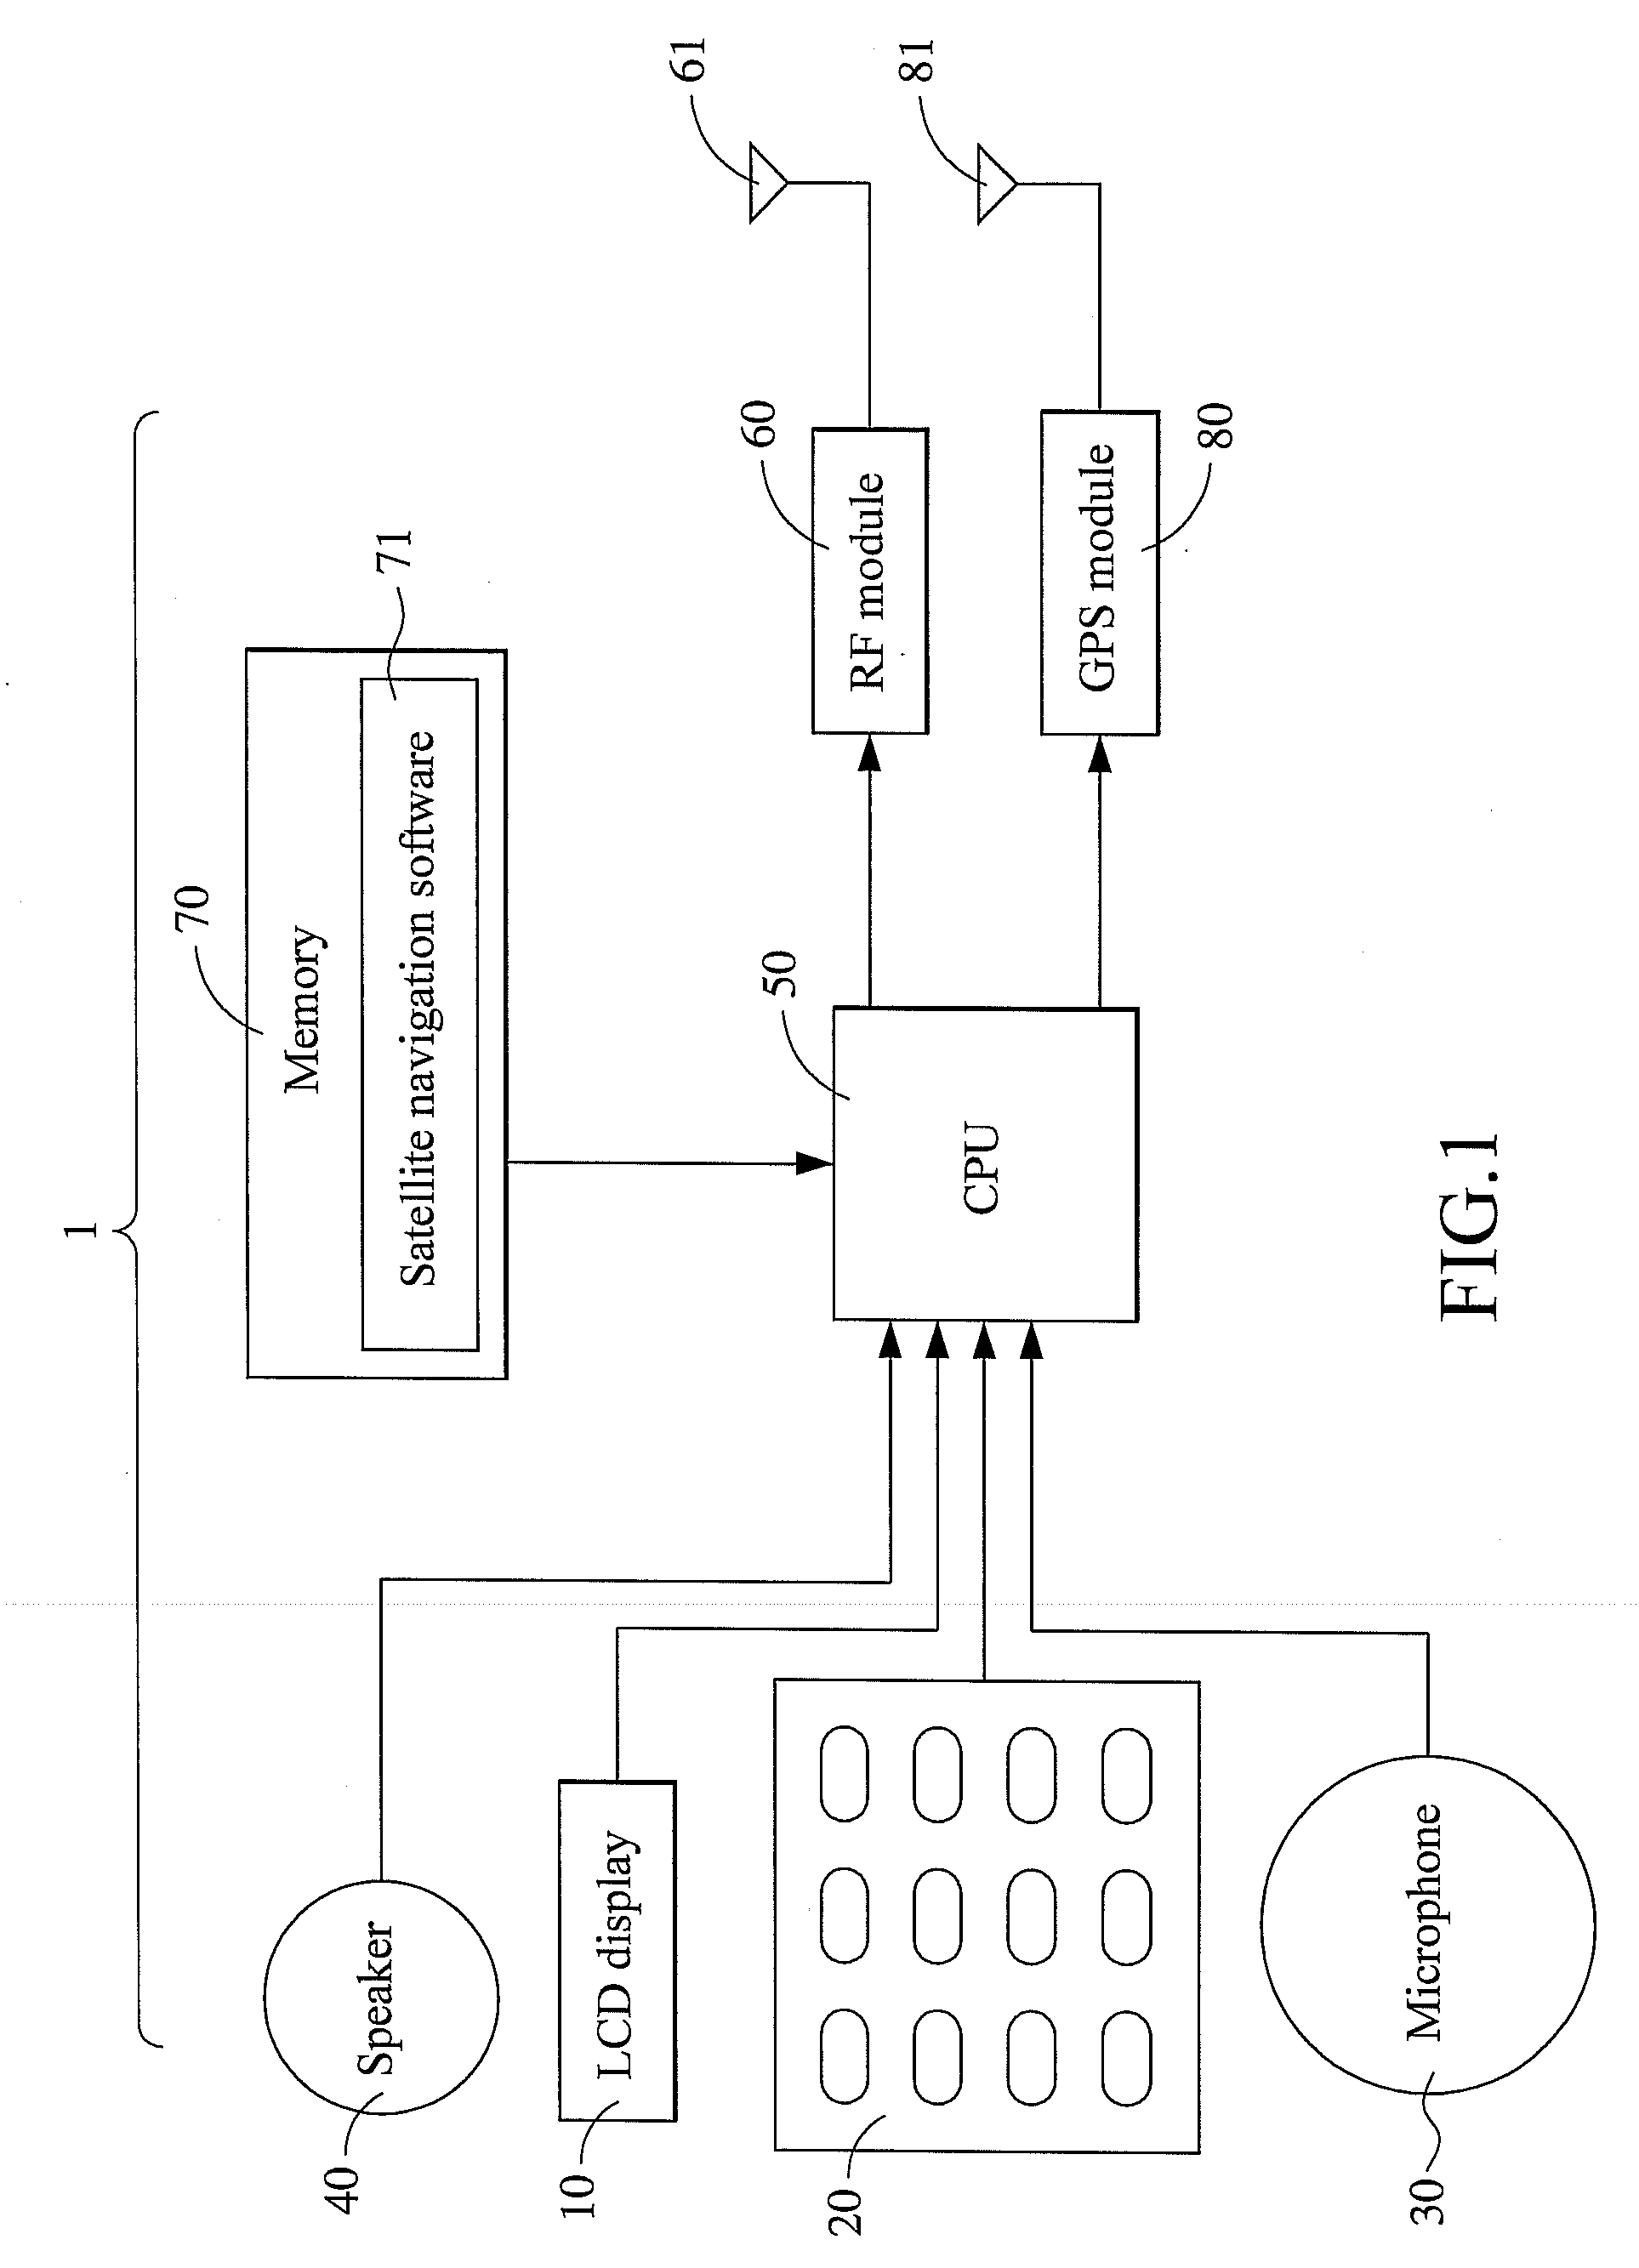 Method for inquiring real-time travel-related information using a mobile communication device